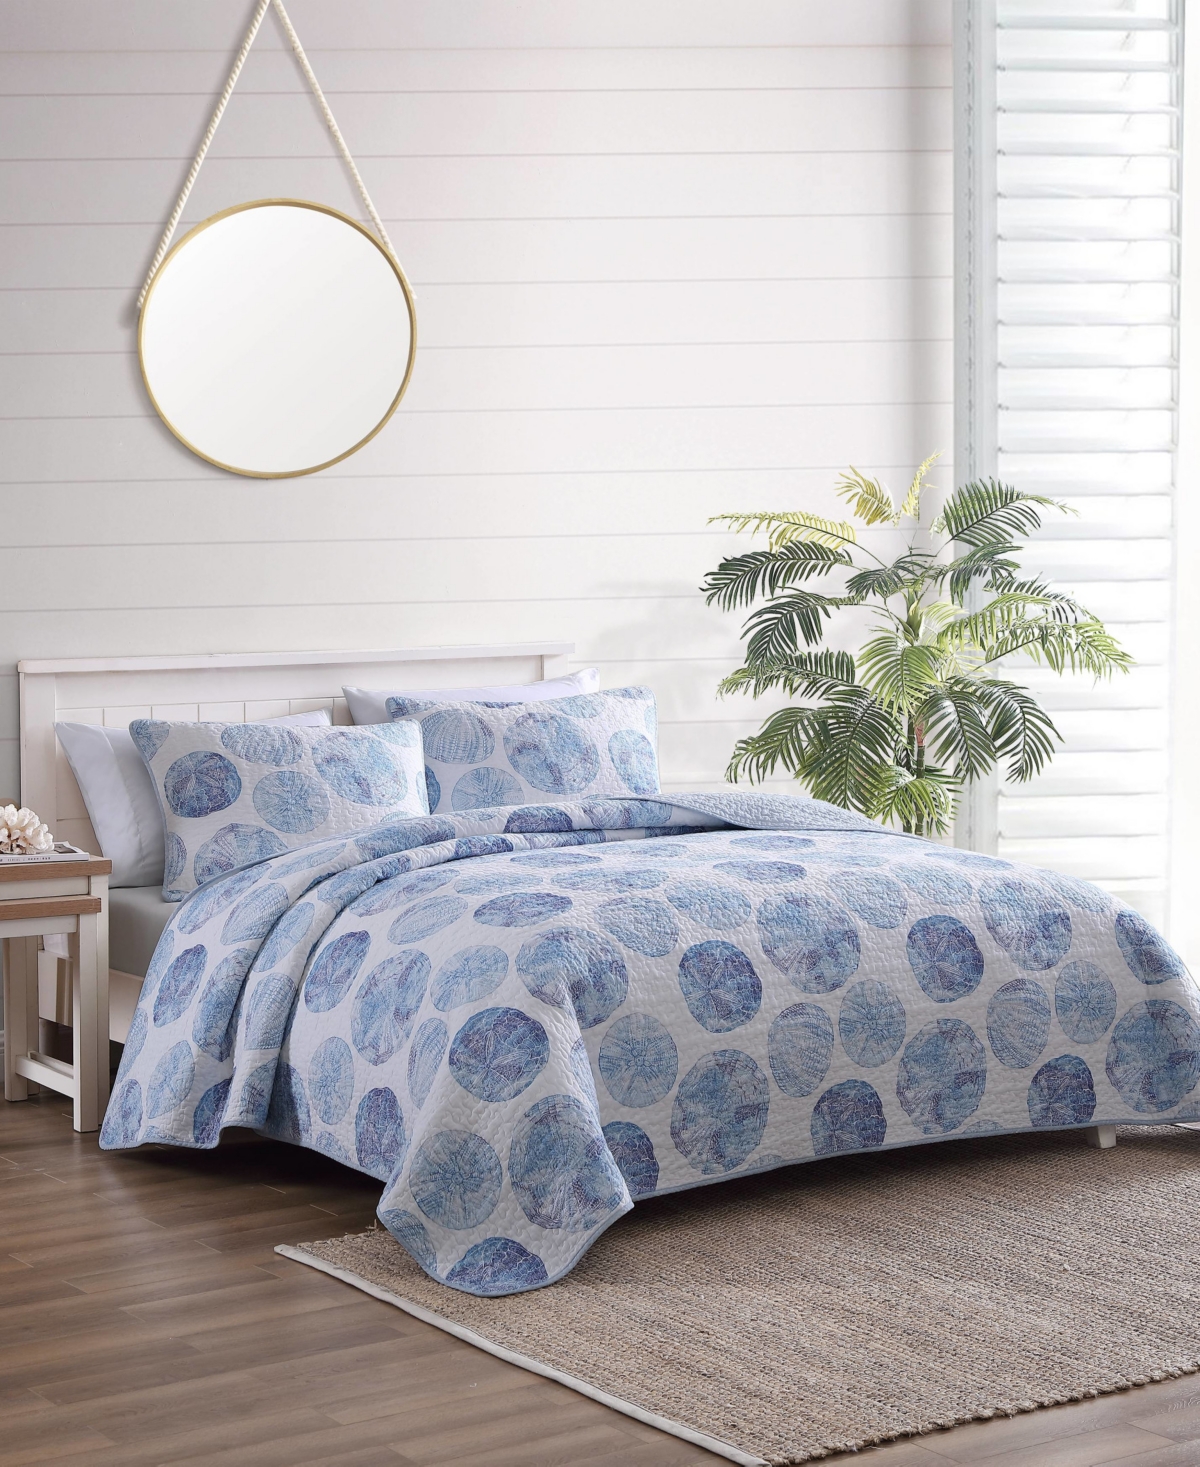 TOMMY BAHAMA HOME TOMMY BAHAMA OCEAN ISLE 3-PC. QUILT SET, FULL/QUEEN BEDDING